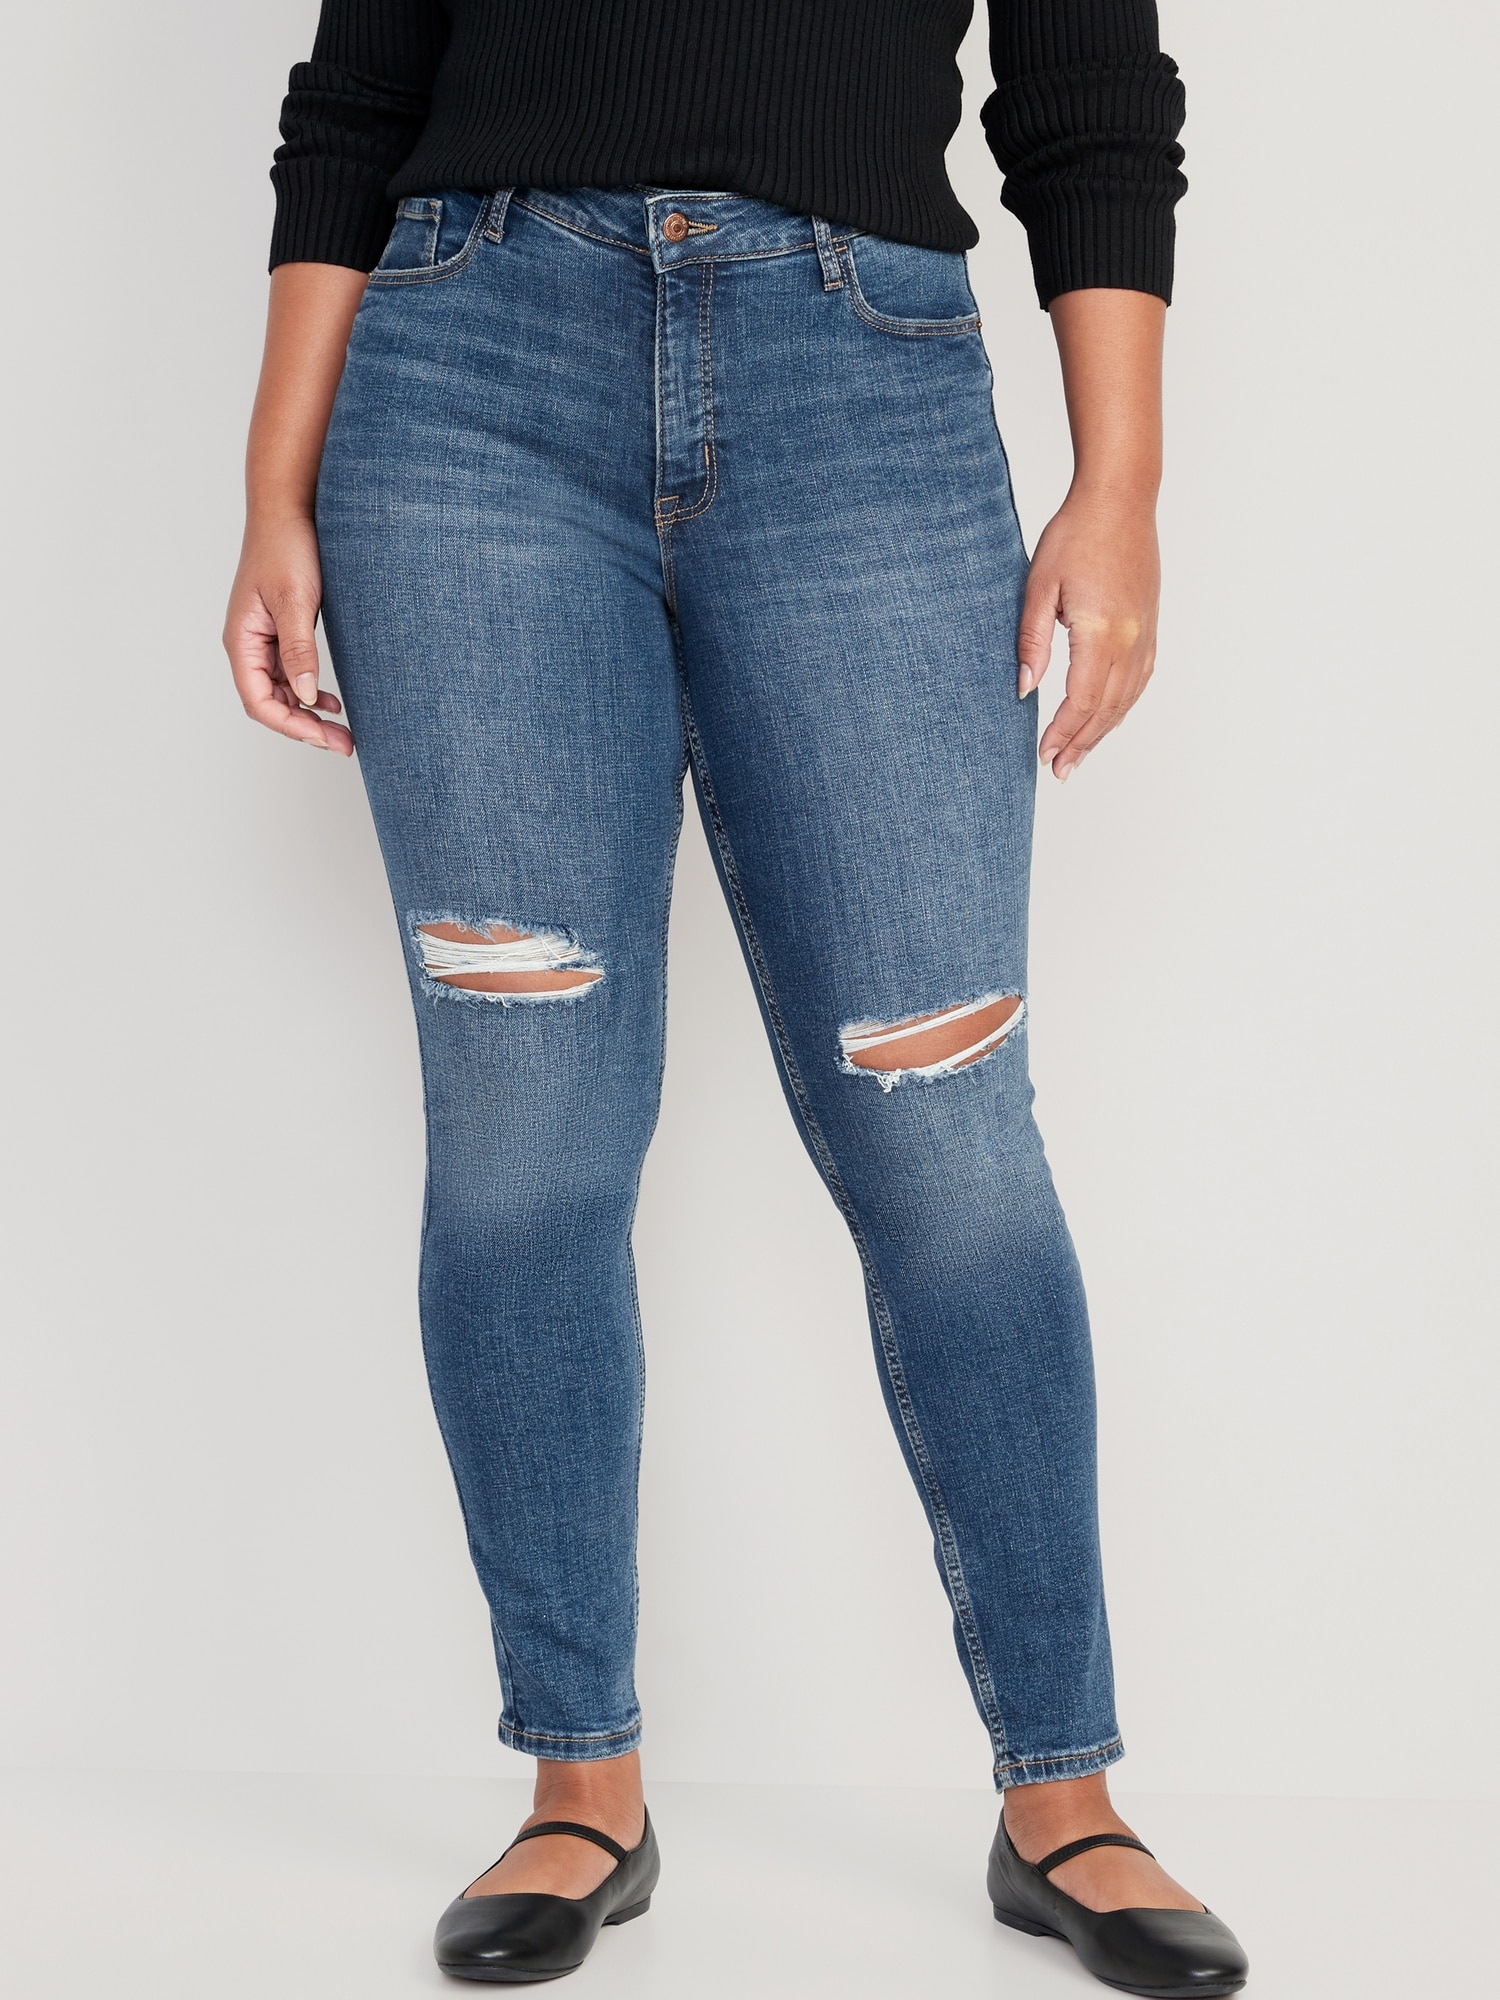 Old Navy High-Waisted Rockstar Super Skinny Sateen Jeans for Women